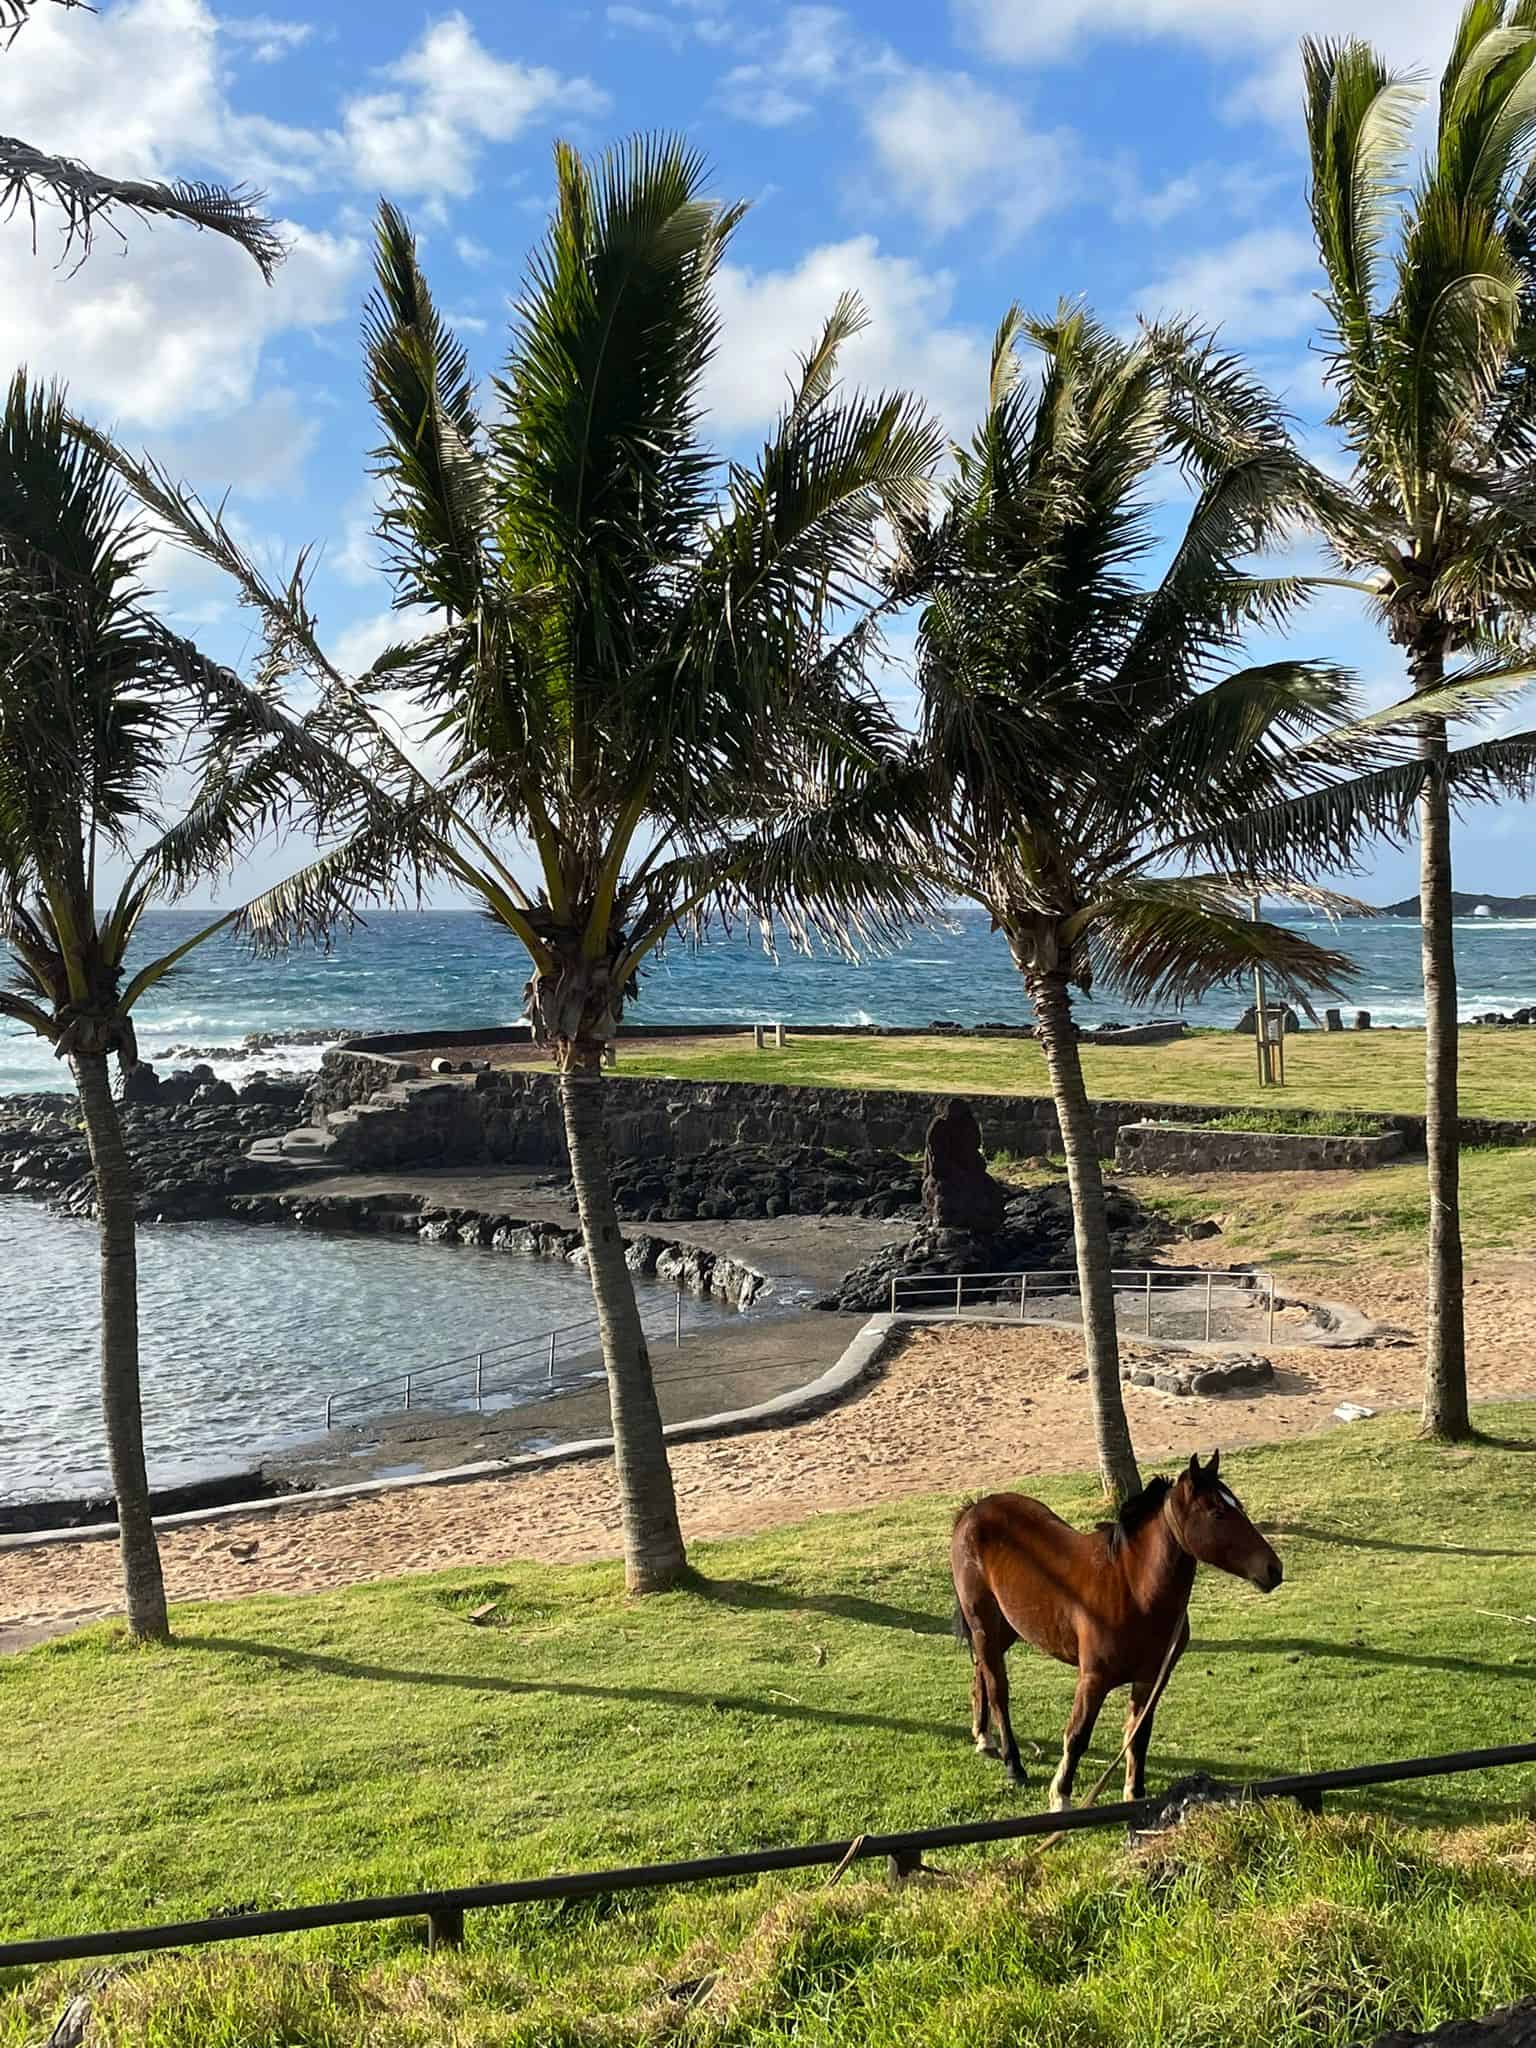 A horse in front of some palm trees on Easter Island